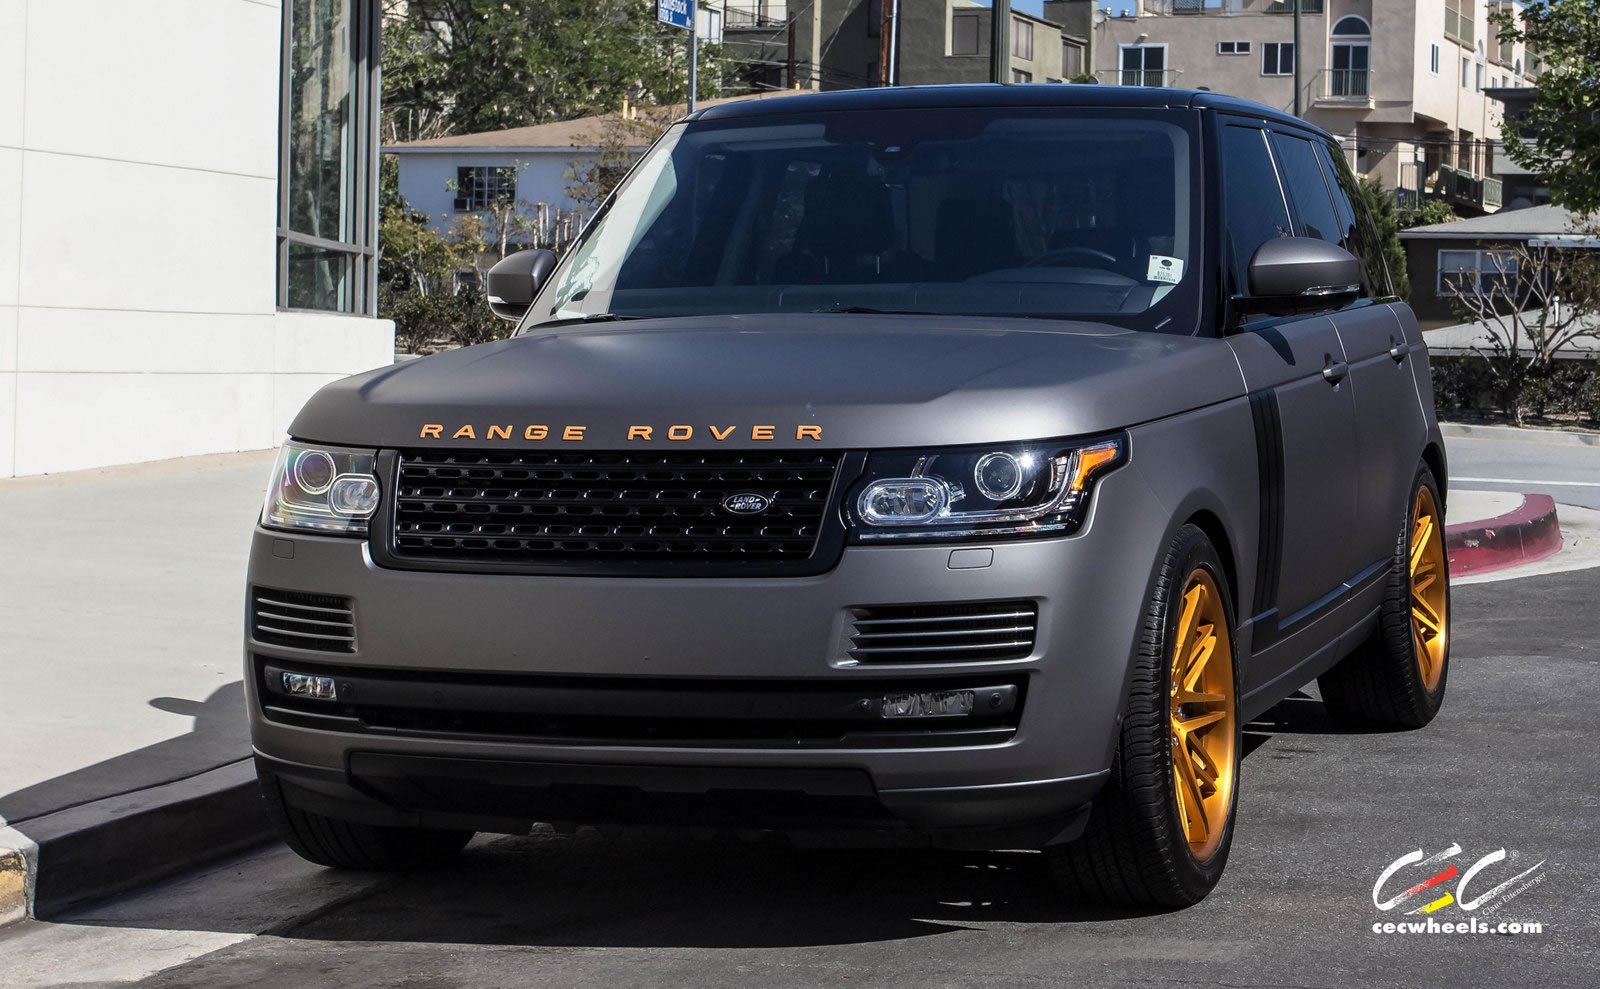 2015, Cec, Wheels, Tuning, Cars, Suv, Range, Rover, Supercharged Wallpaper